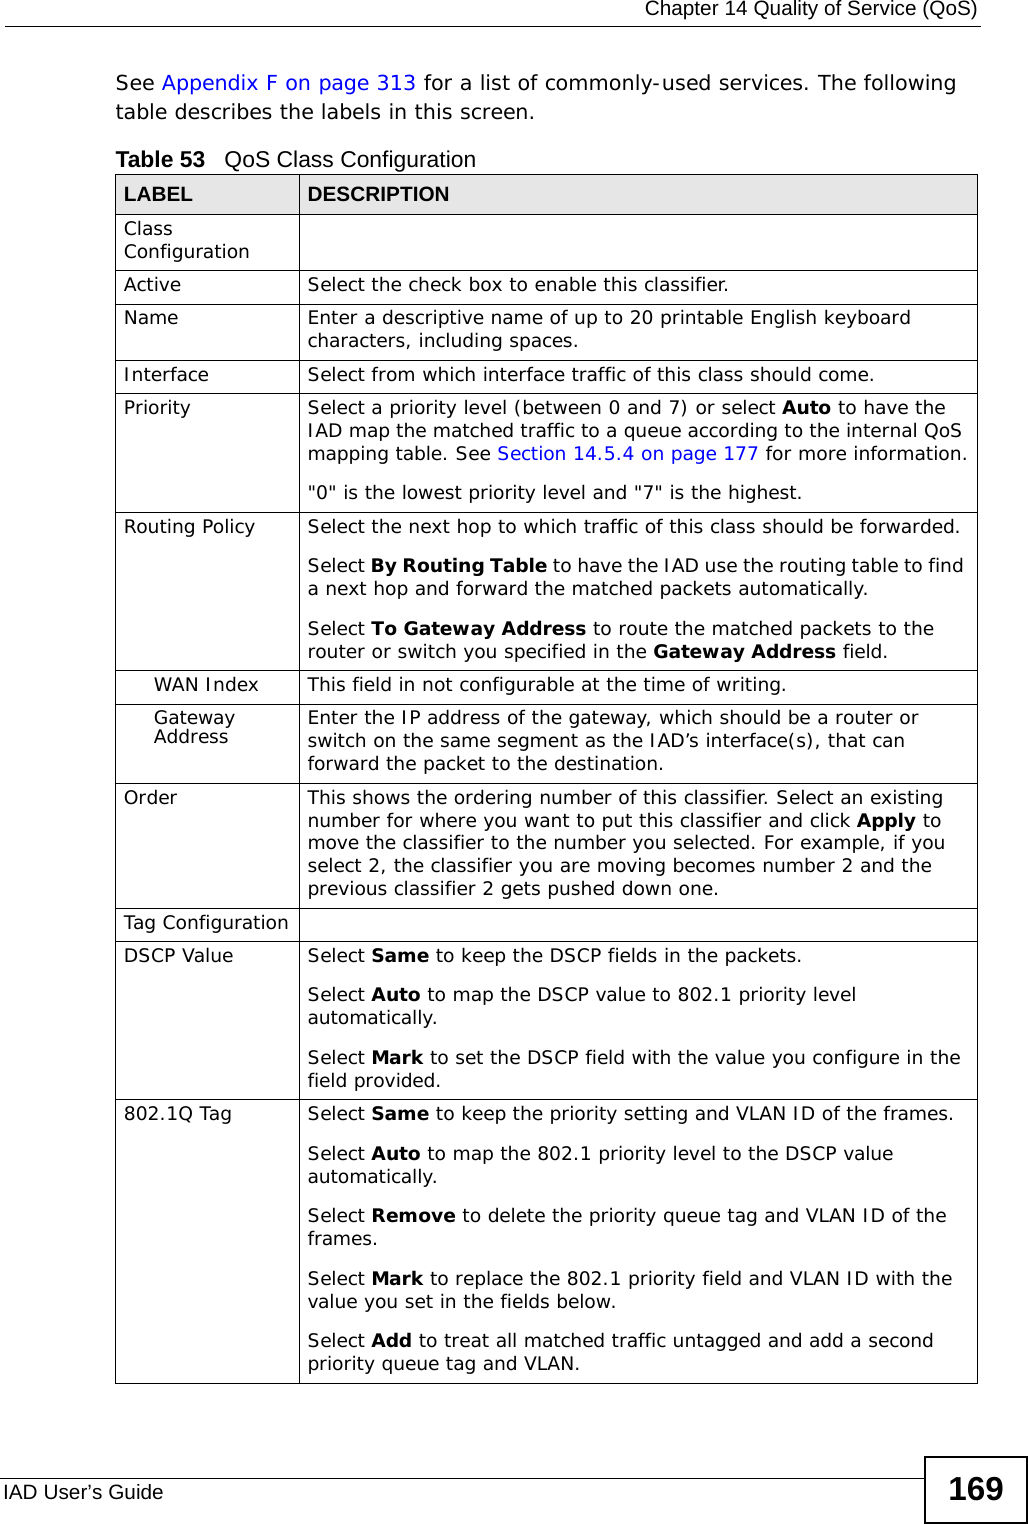  Chapter 14 Quality of Service (QoS)IAD User’s Guide 169See Appendix F on page 313 for a list of commonly-used services. The following table describes the labels in this screen.  Table 53   QoS Class ConfigurationLABEL DESCRIPTIONClass ConfigurationActive Select the check box to enable this classifier.Name  Enter a descriptive name of up to 20 printable English keyboard characters, including spaces.Interface Select from which interface traffic of this class should come.Priority Select a priority level (between 0 and 7) or select Auto to have the IAD map the matched traffic to a queue according to the internal QoS mapping table. See Section 14.5.4 on page 177 for more information.&quot;0&quot; is the lowest priority level and &quot;7&quot; is the highest.Routing Policy Select the next hop to which traffic of this class should be forwarded.Select By Routing Table to have the IAD use the routing table to find a next hop and forward the matched packets automatically.Select To Gateway Address to route the matched packets to the router or switch you specified in the Gateway Address field.WAN Index  This field in not configurable at the time of writing.Gateway Address Enter the IP address of the gateway, which should be a router or switch on the same segment as the IAD’s interface(s), that can forward the packet to the destination.Order  This shows the ordering number of this classifier. Select an existing number for where you want to put this classifier and click Apply to move the classifier to the number you selected. For example, if you select 2, the classifier you are moving becomes number 2 and the previous classifier 2 gets pushed down one.Tag ConfigurationDSCP Value Select Same to keep the DSCP fields in the packets. Select Auto to map the DSCP value to 802.1 priority level automatically.Select Mark to set the DSCP field with the value you configure in the field provided. 802.1Q Tag Select Same to keep the priority setting and VLAN ID of the frames. Select Auto to map the 802.1 priority level to the DSCP value automatically.Select Remove to delete the priority queue tag and VLAN ID of the frames.Select Mark to replace the 802.1 priority field and VLAN ID with the value you set in the fields below. Select Add to treat all matched traffic untagged and add a second priority queue tag and VLAN.